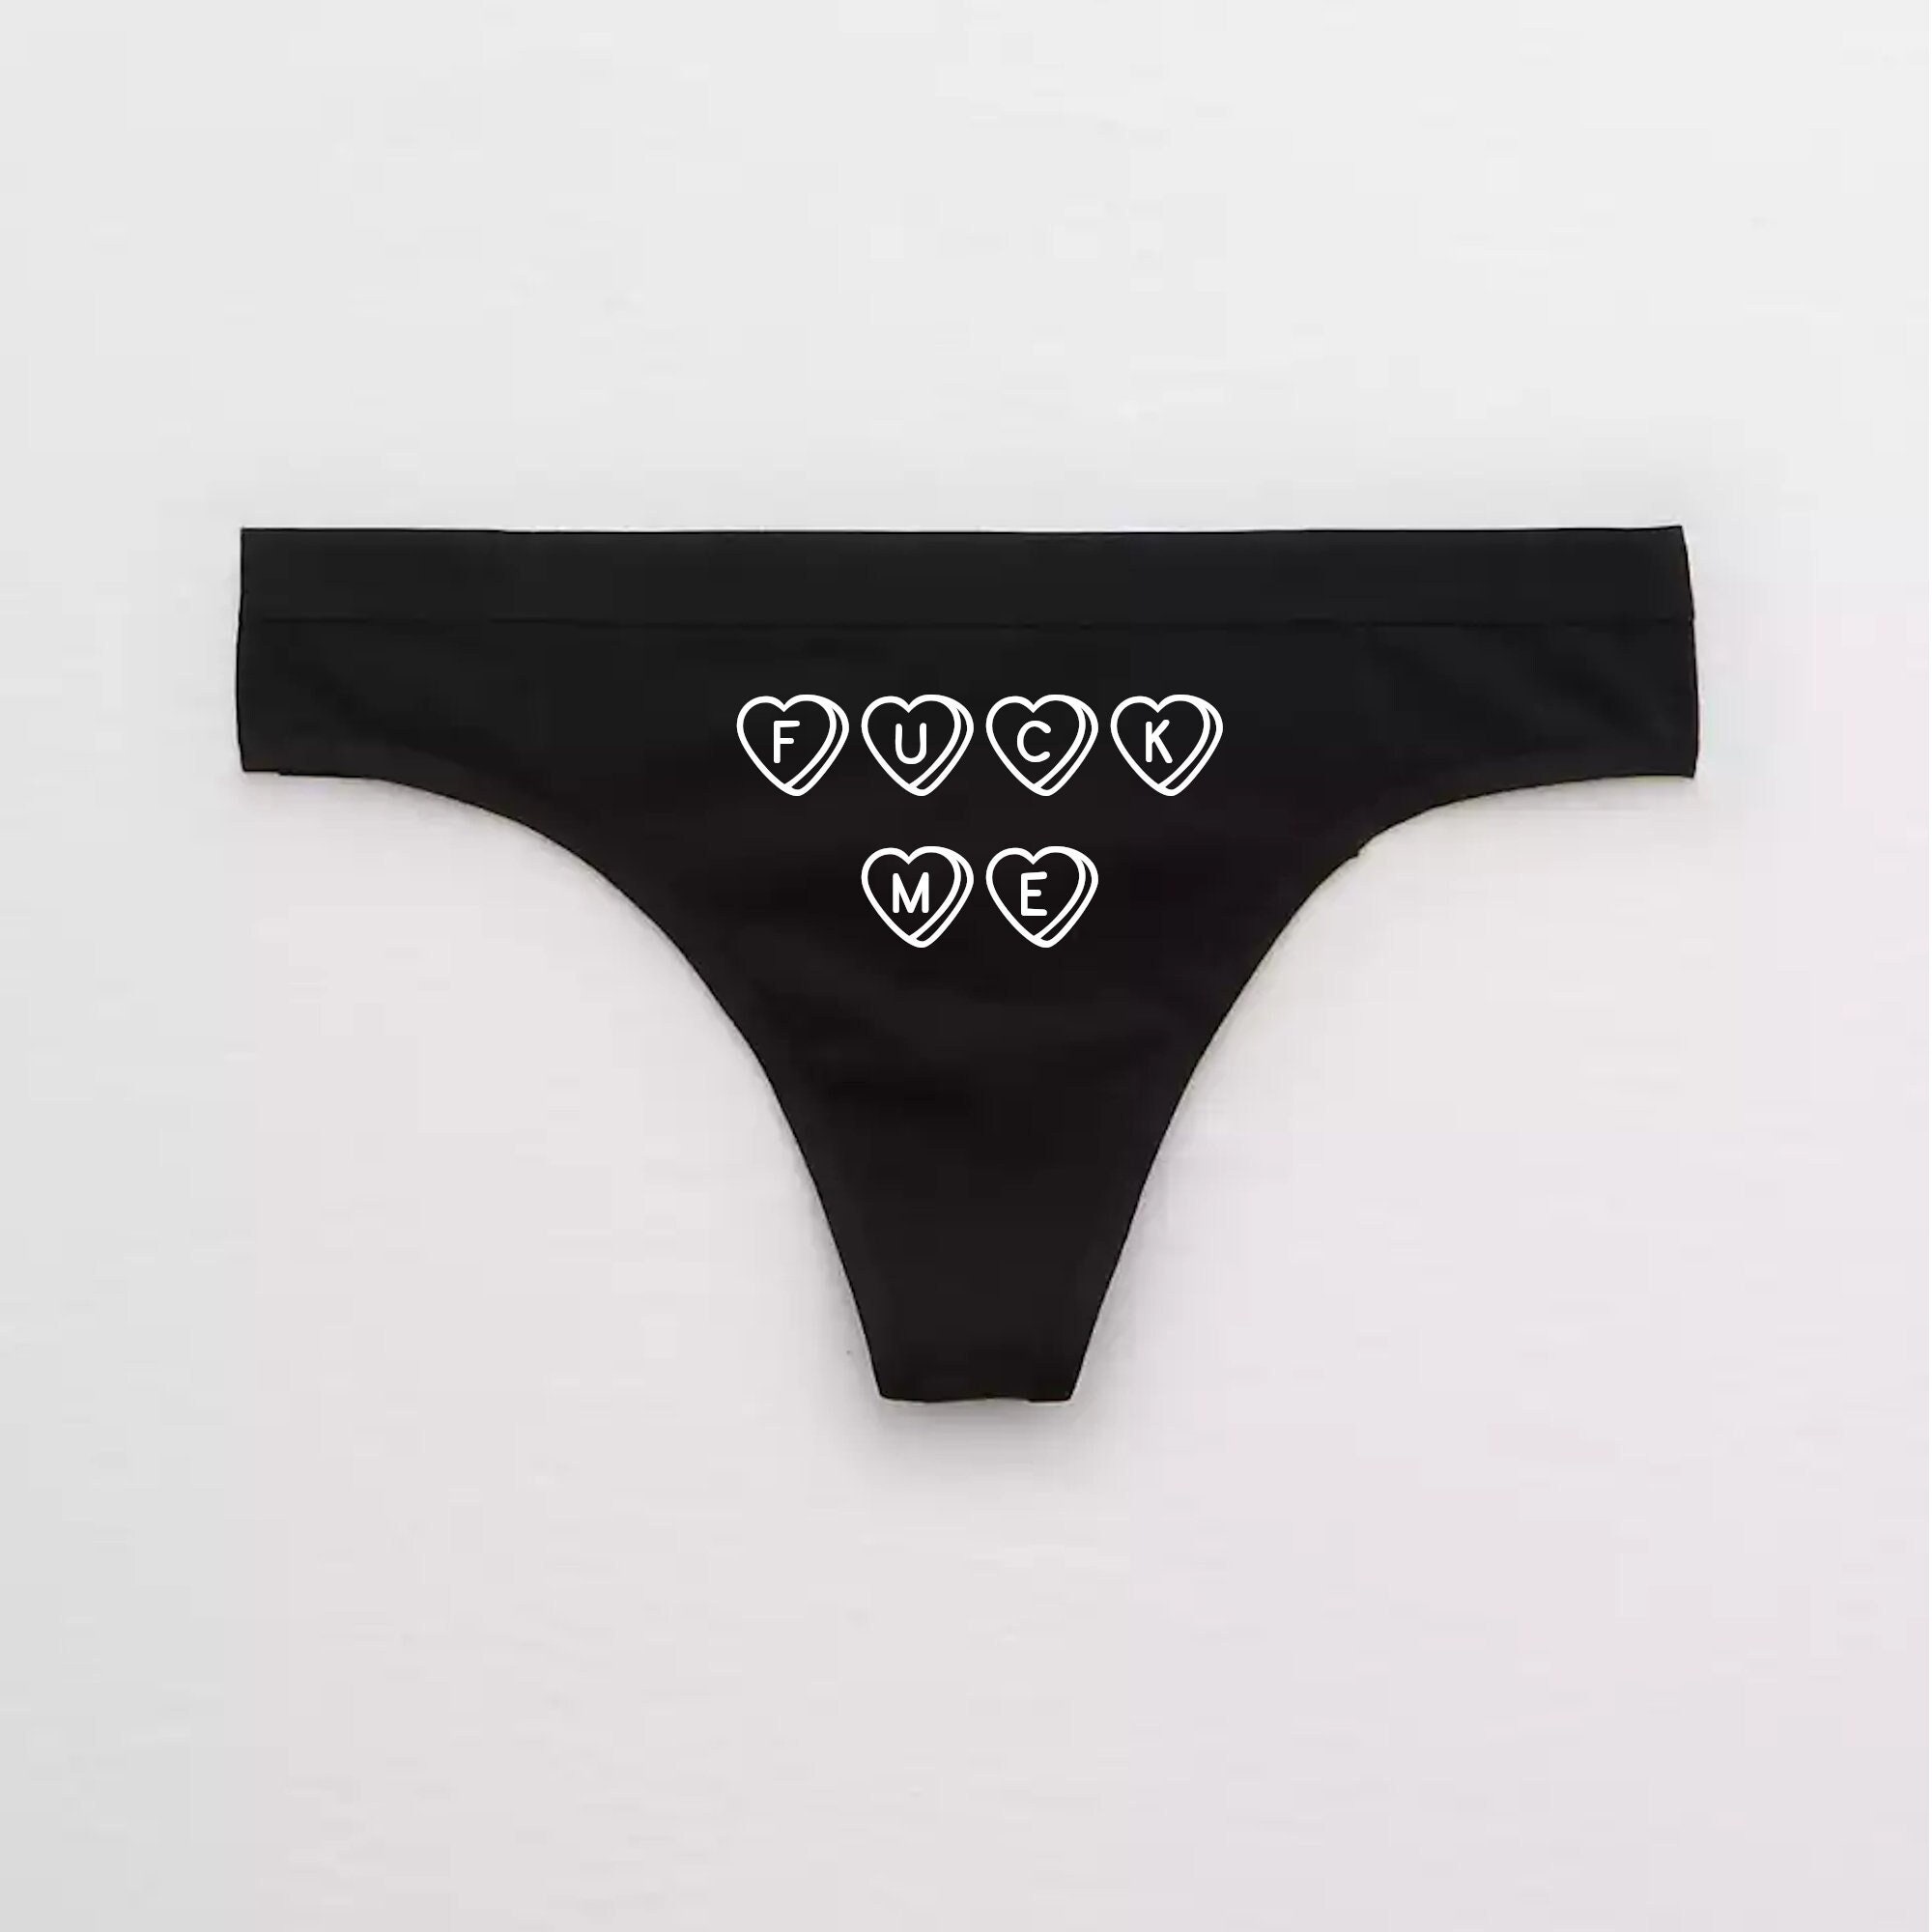 Fuck Me Candy Hearts Slut Thong / DDLG Daddy Dom BDSM Panties